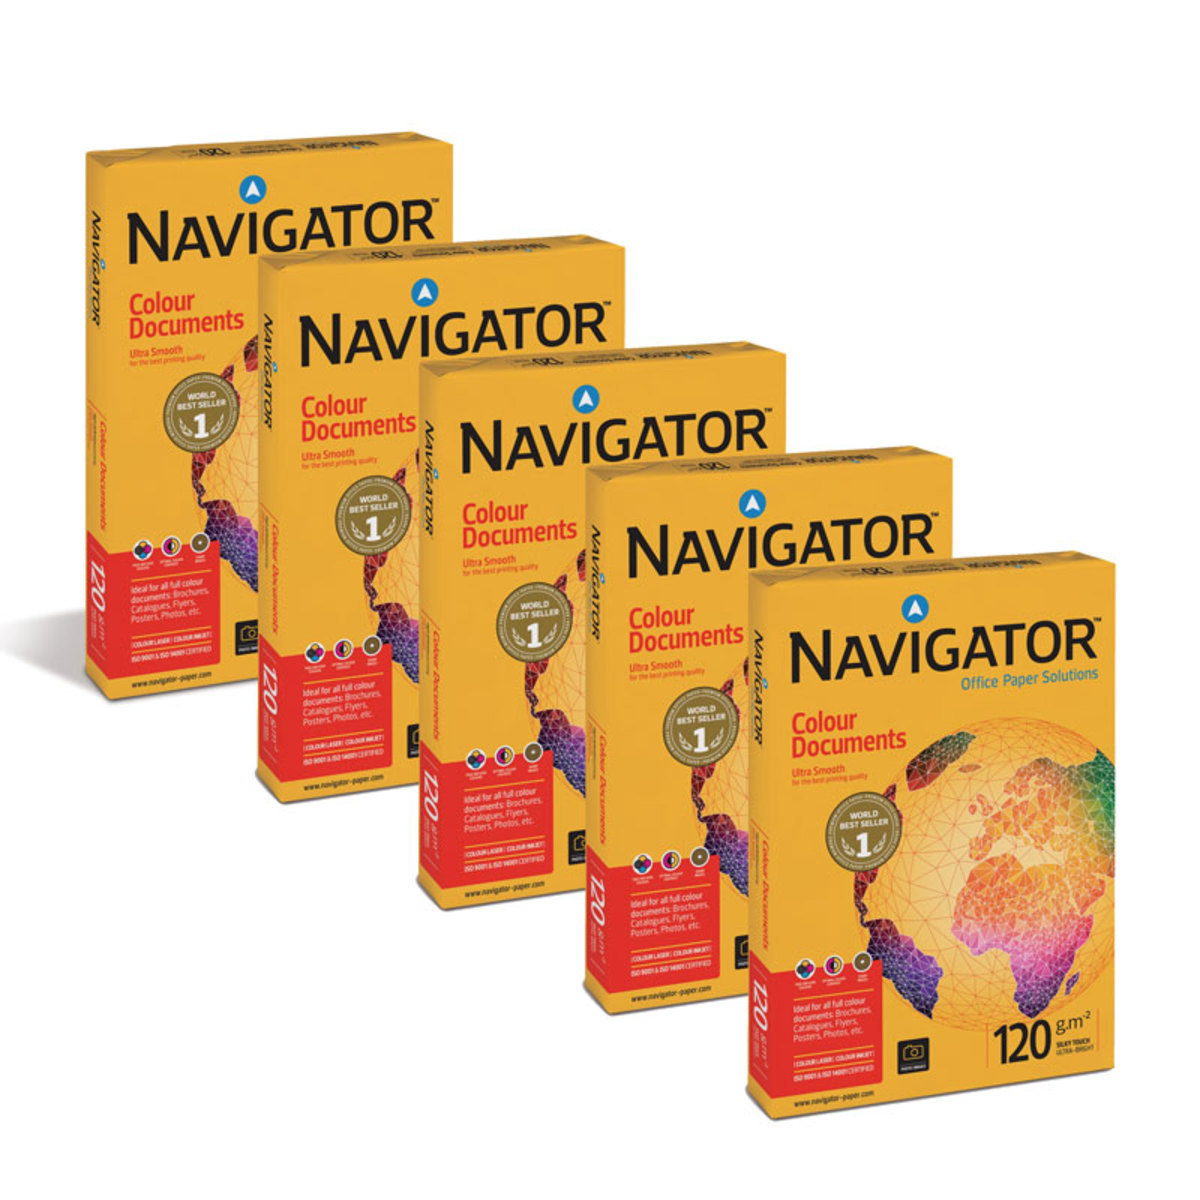 Navigator Colour Documents A4 120gsm White Box of Paper - 1250 sheets